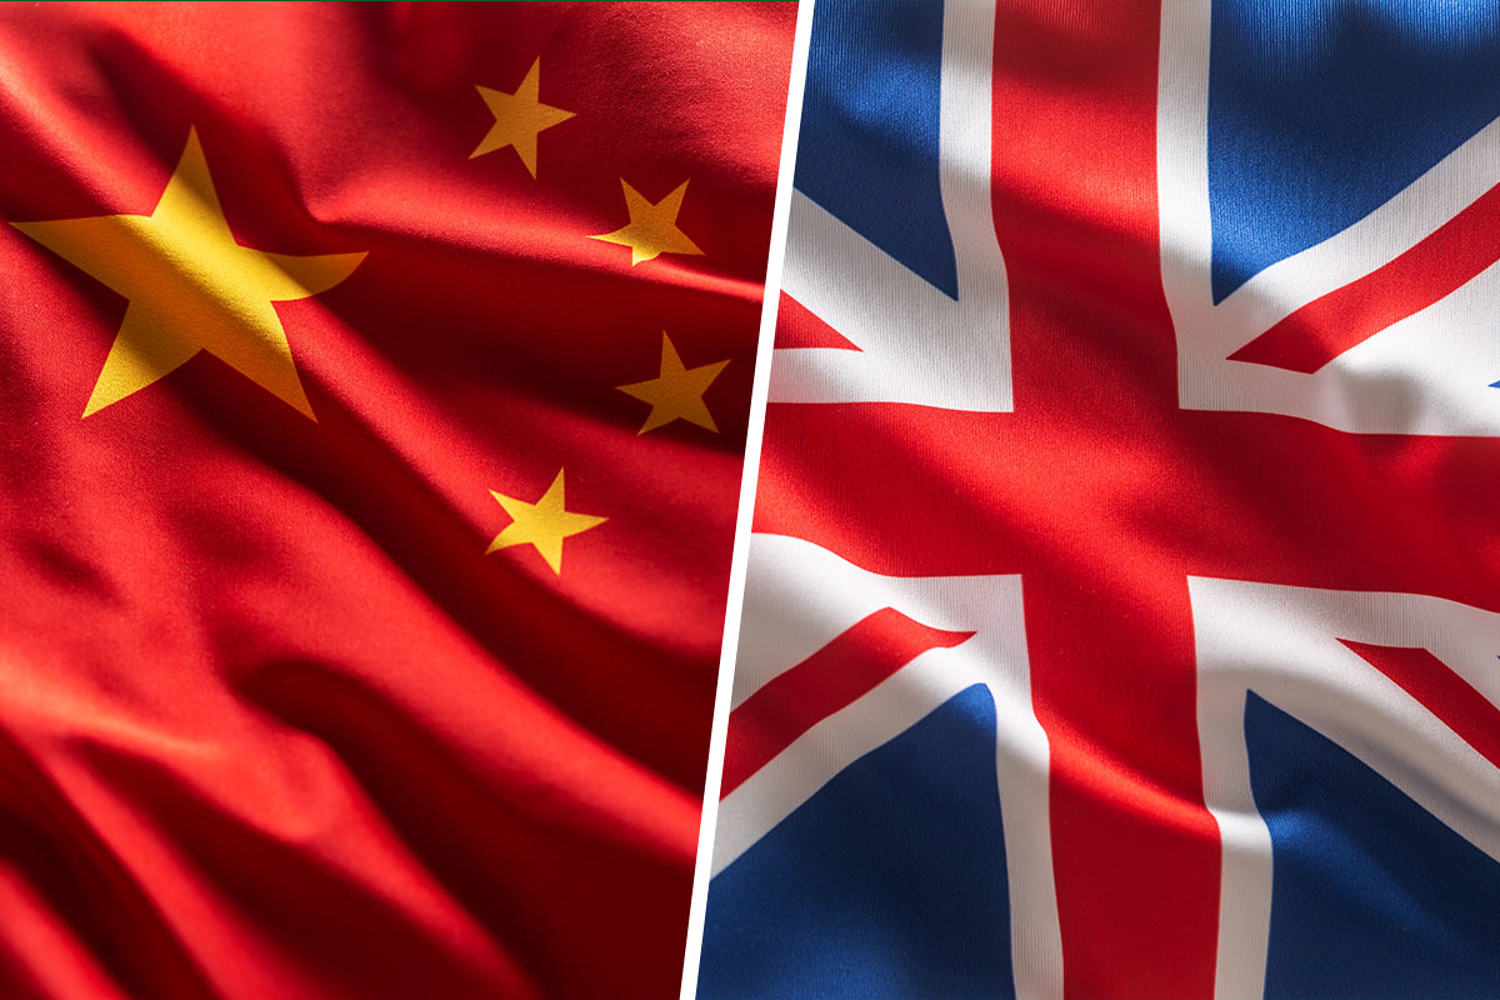 Beijing accuses 2 Chinese citizens of being British spies